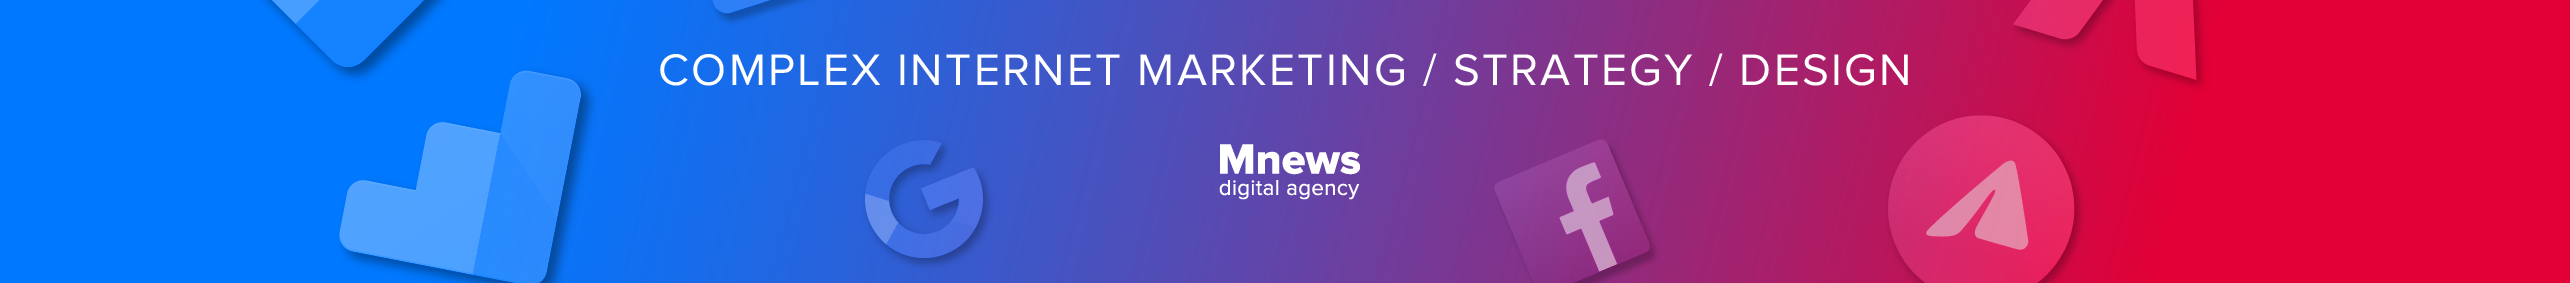 MNEWS AGENCY's profile banner